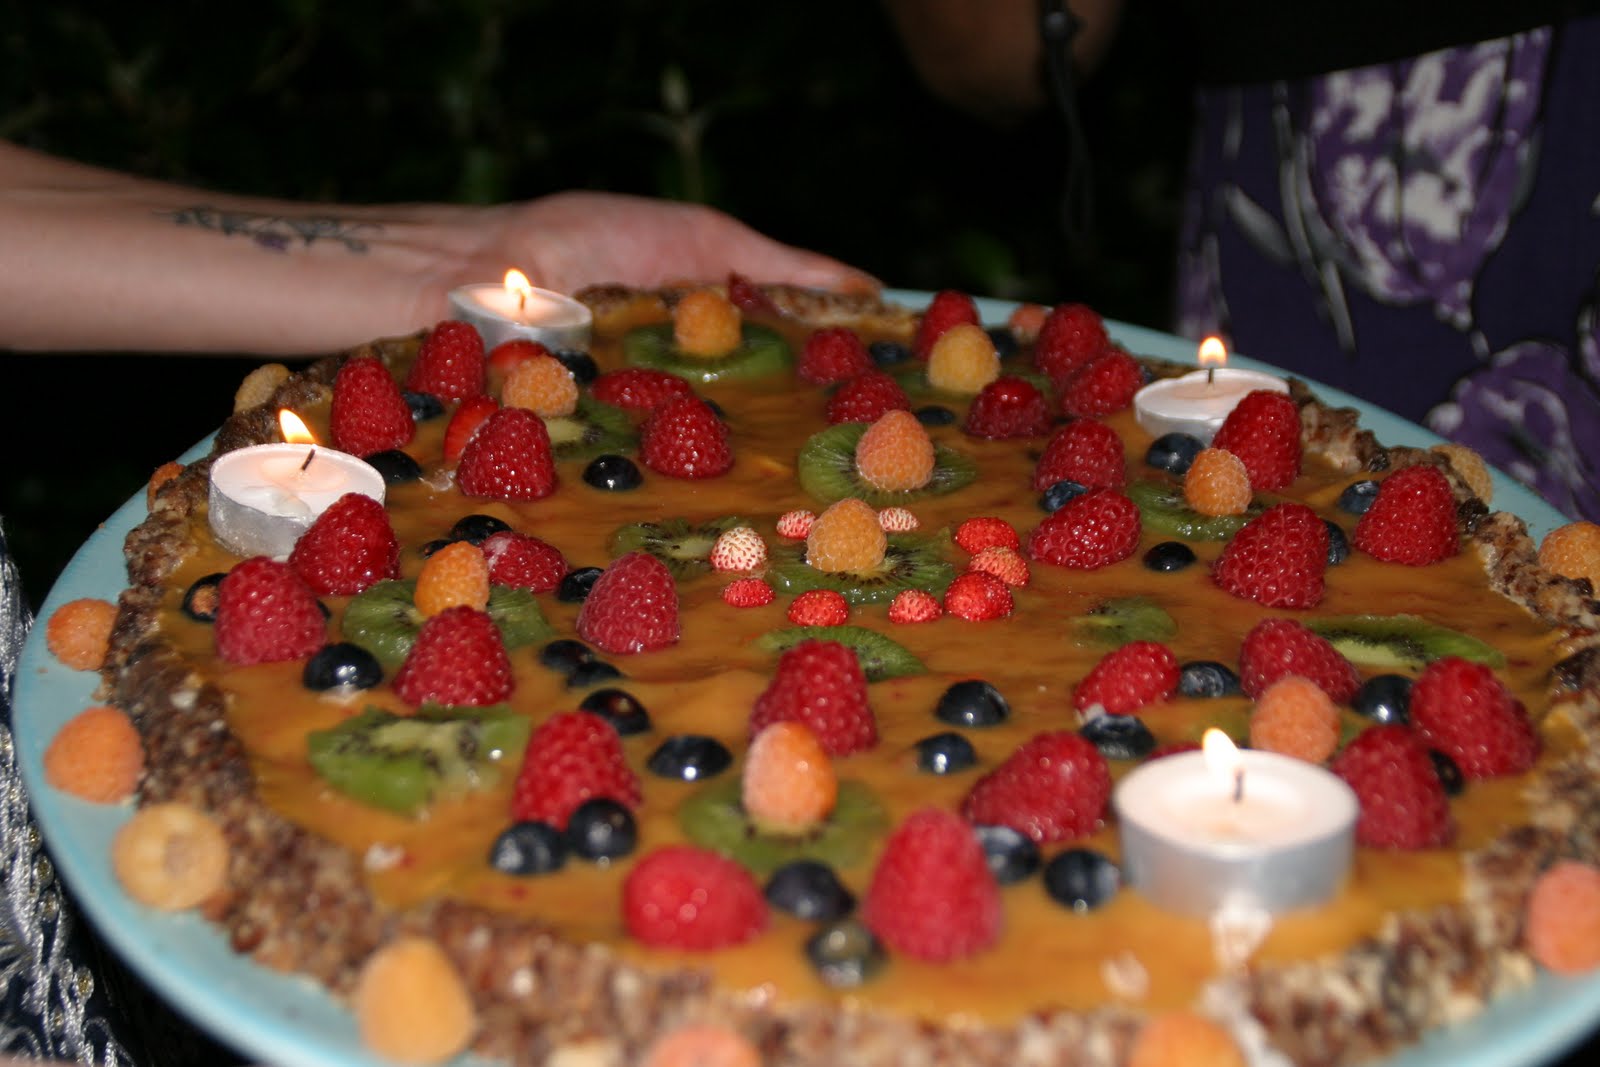 a plate with a cake that has fruit and candles on it